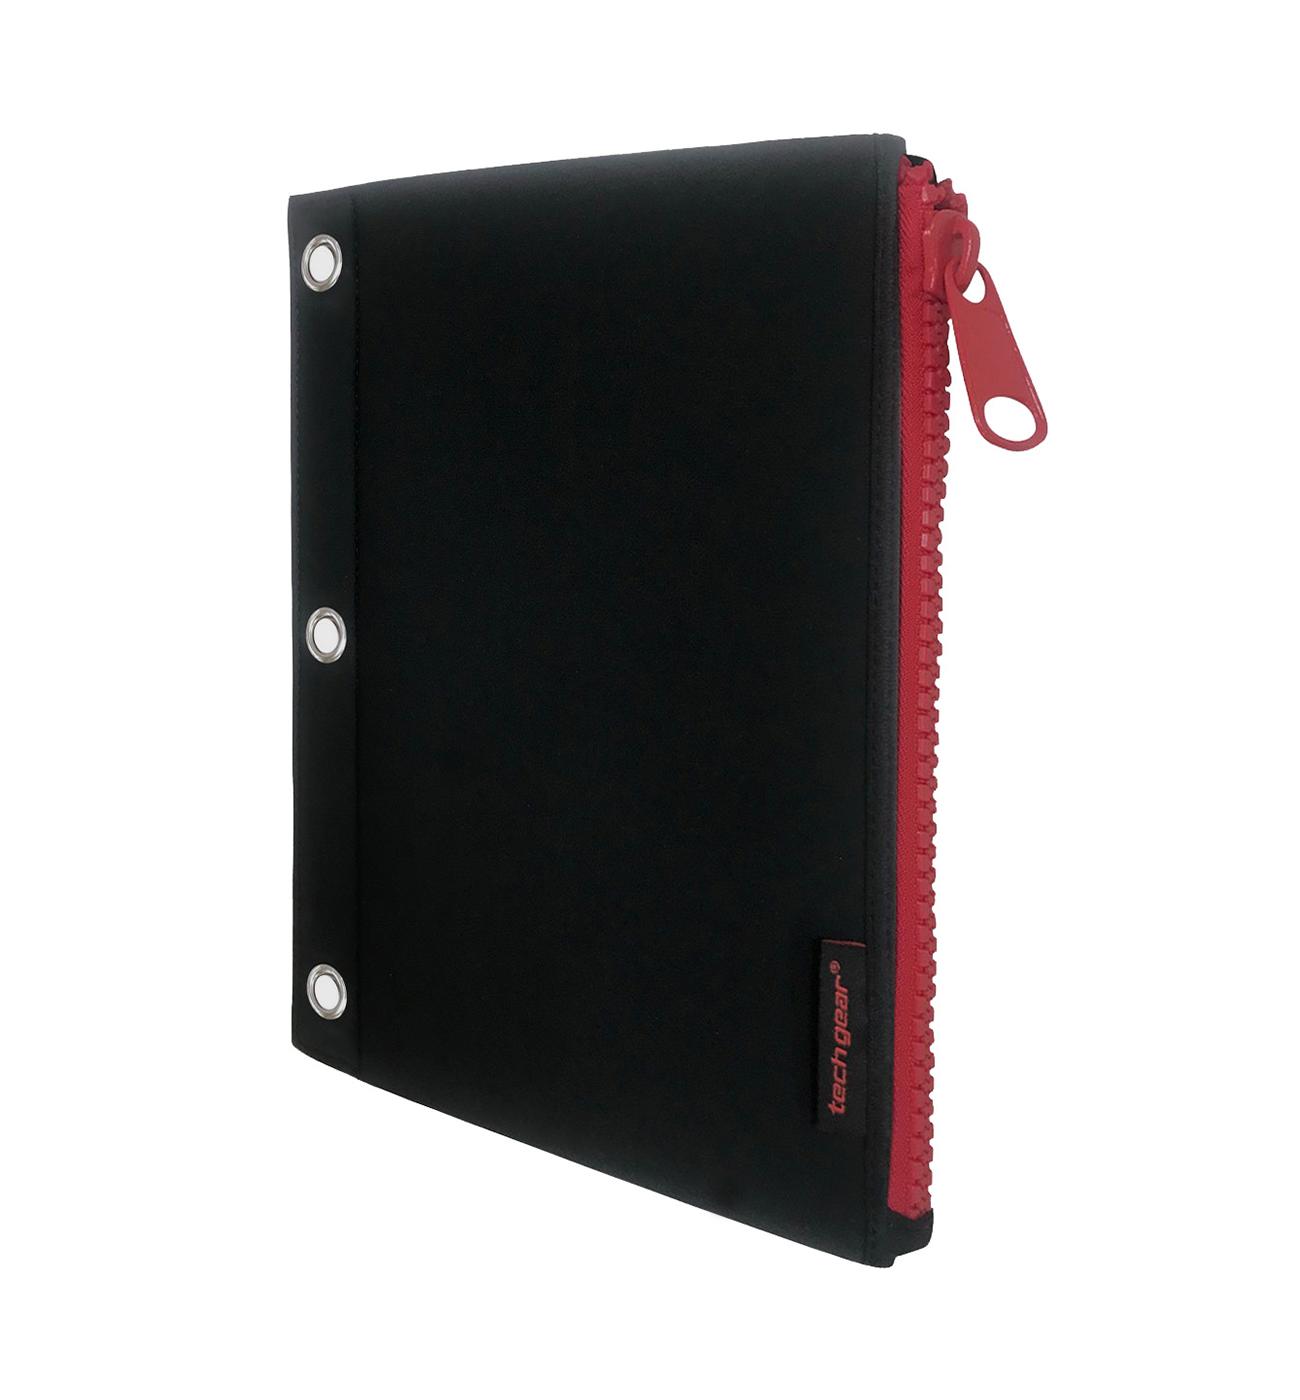 Tech Gear Neo XLZ Binder Pouch - Black & Red; image 2 of 2